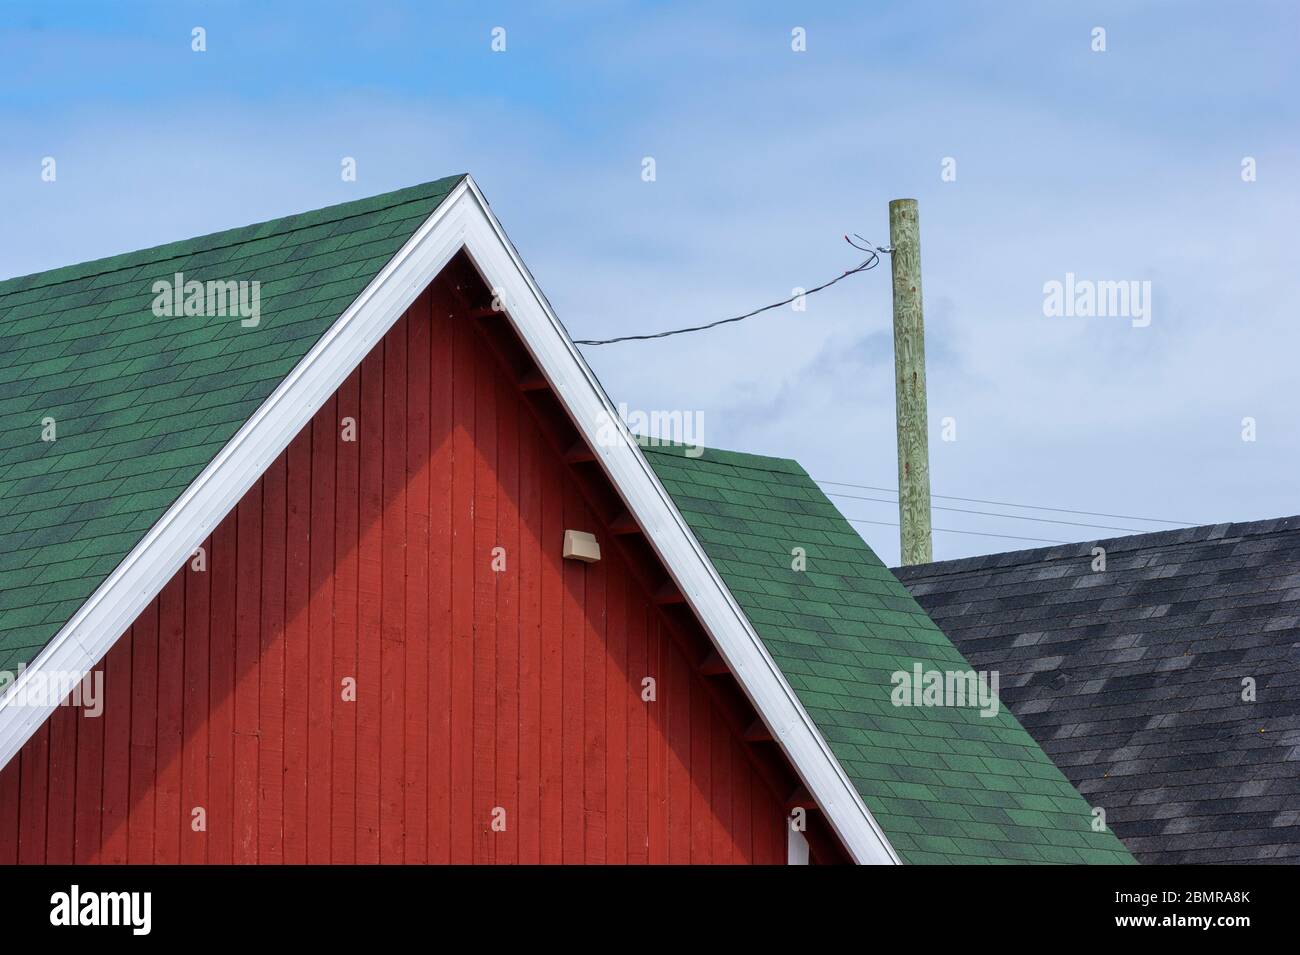 Fisherman's shack graphism. Red-painted siding and green roof shingles. White gable fascia against a blue sky. North Rustico Harbour, PEI, Canada Stock Photo